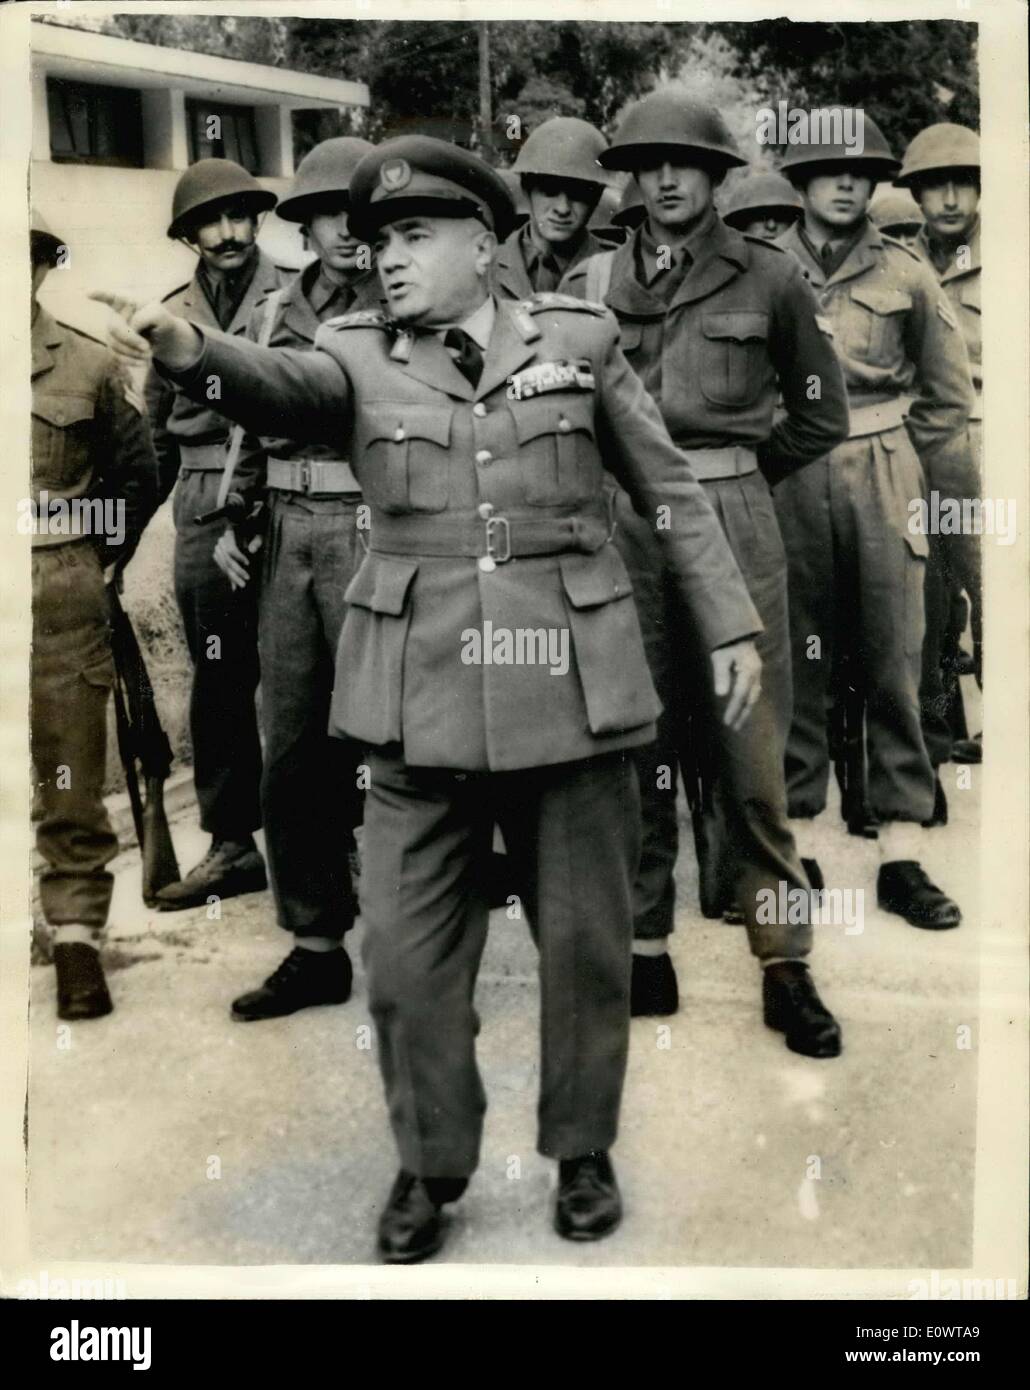 Feb. 12, 1964 - Greek-Cypriot army formed: In view of the overhanging danger of invasion of the inter-communal conflicts on a larger scale, the Cyprus government decided to form an armed force composed of young Greek-Cypriots who are ready to fight and different their country. Photo shows General pandelides, the commander of the Cyprus army, with come of his troops. Stock Photo